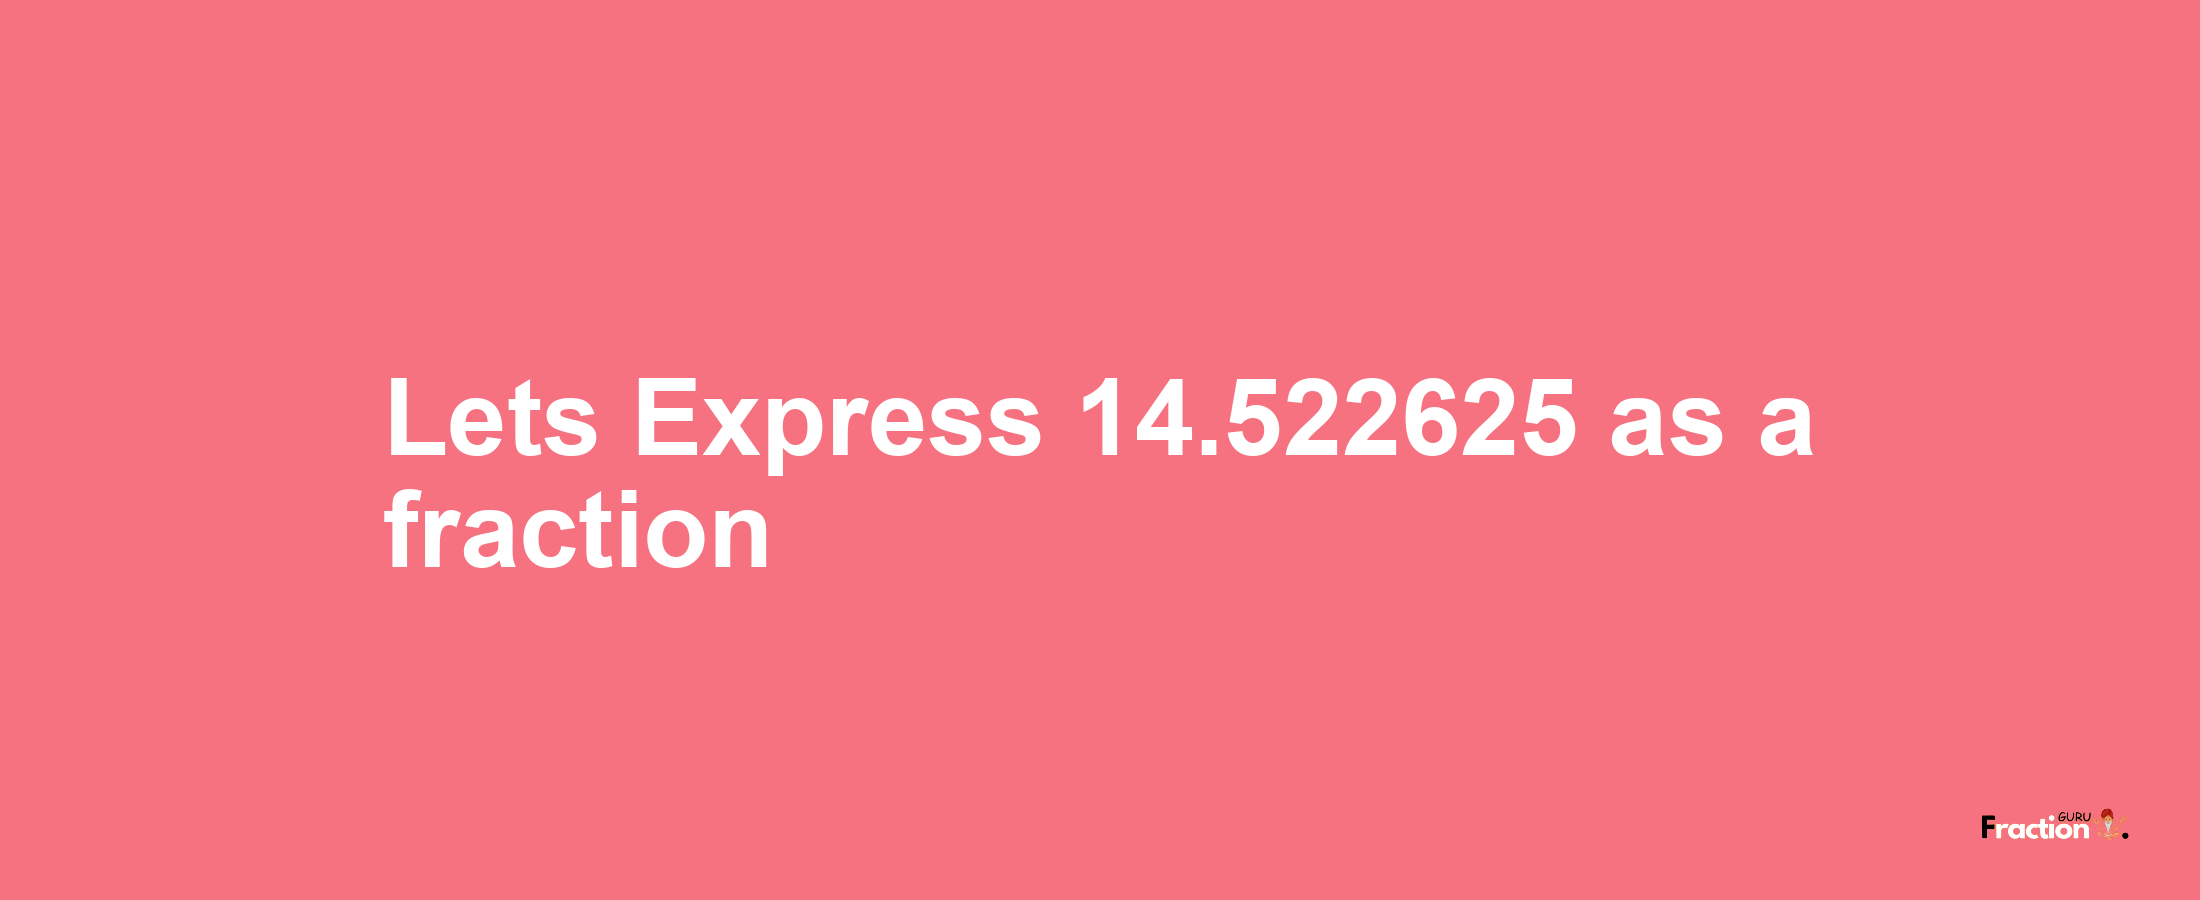 Lets Express 14.522625 as afraction